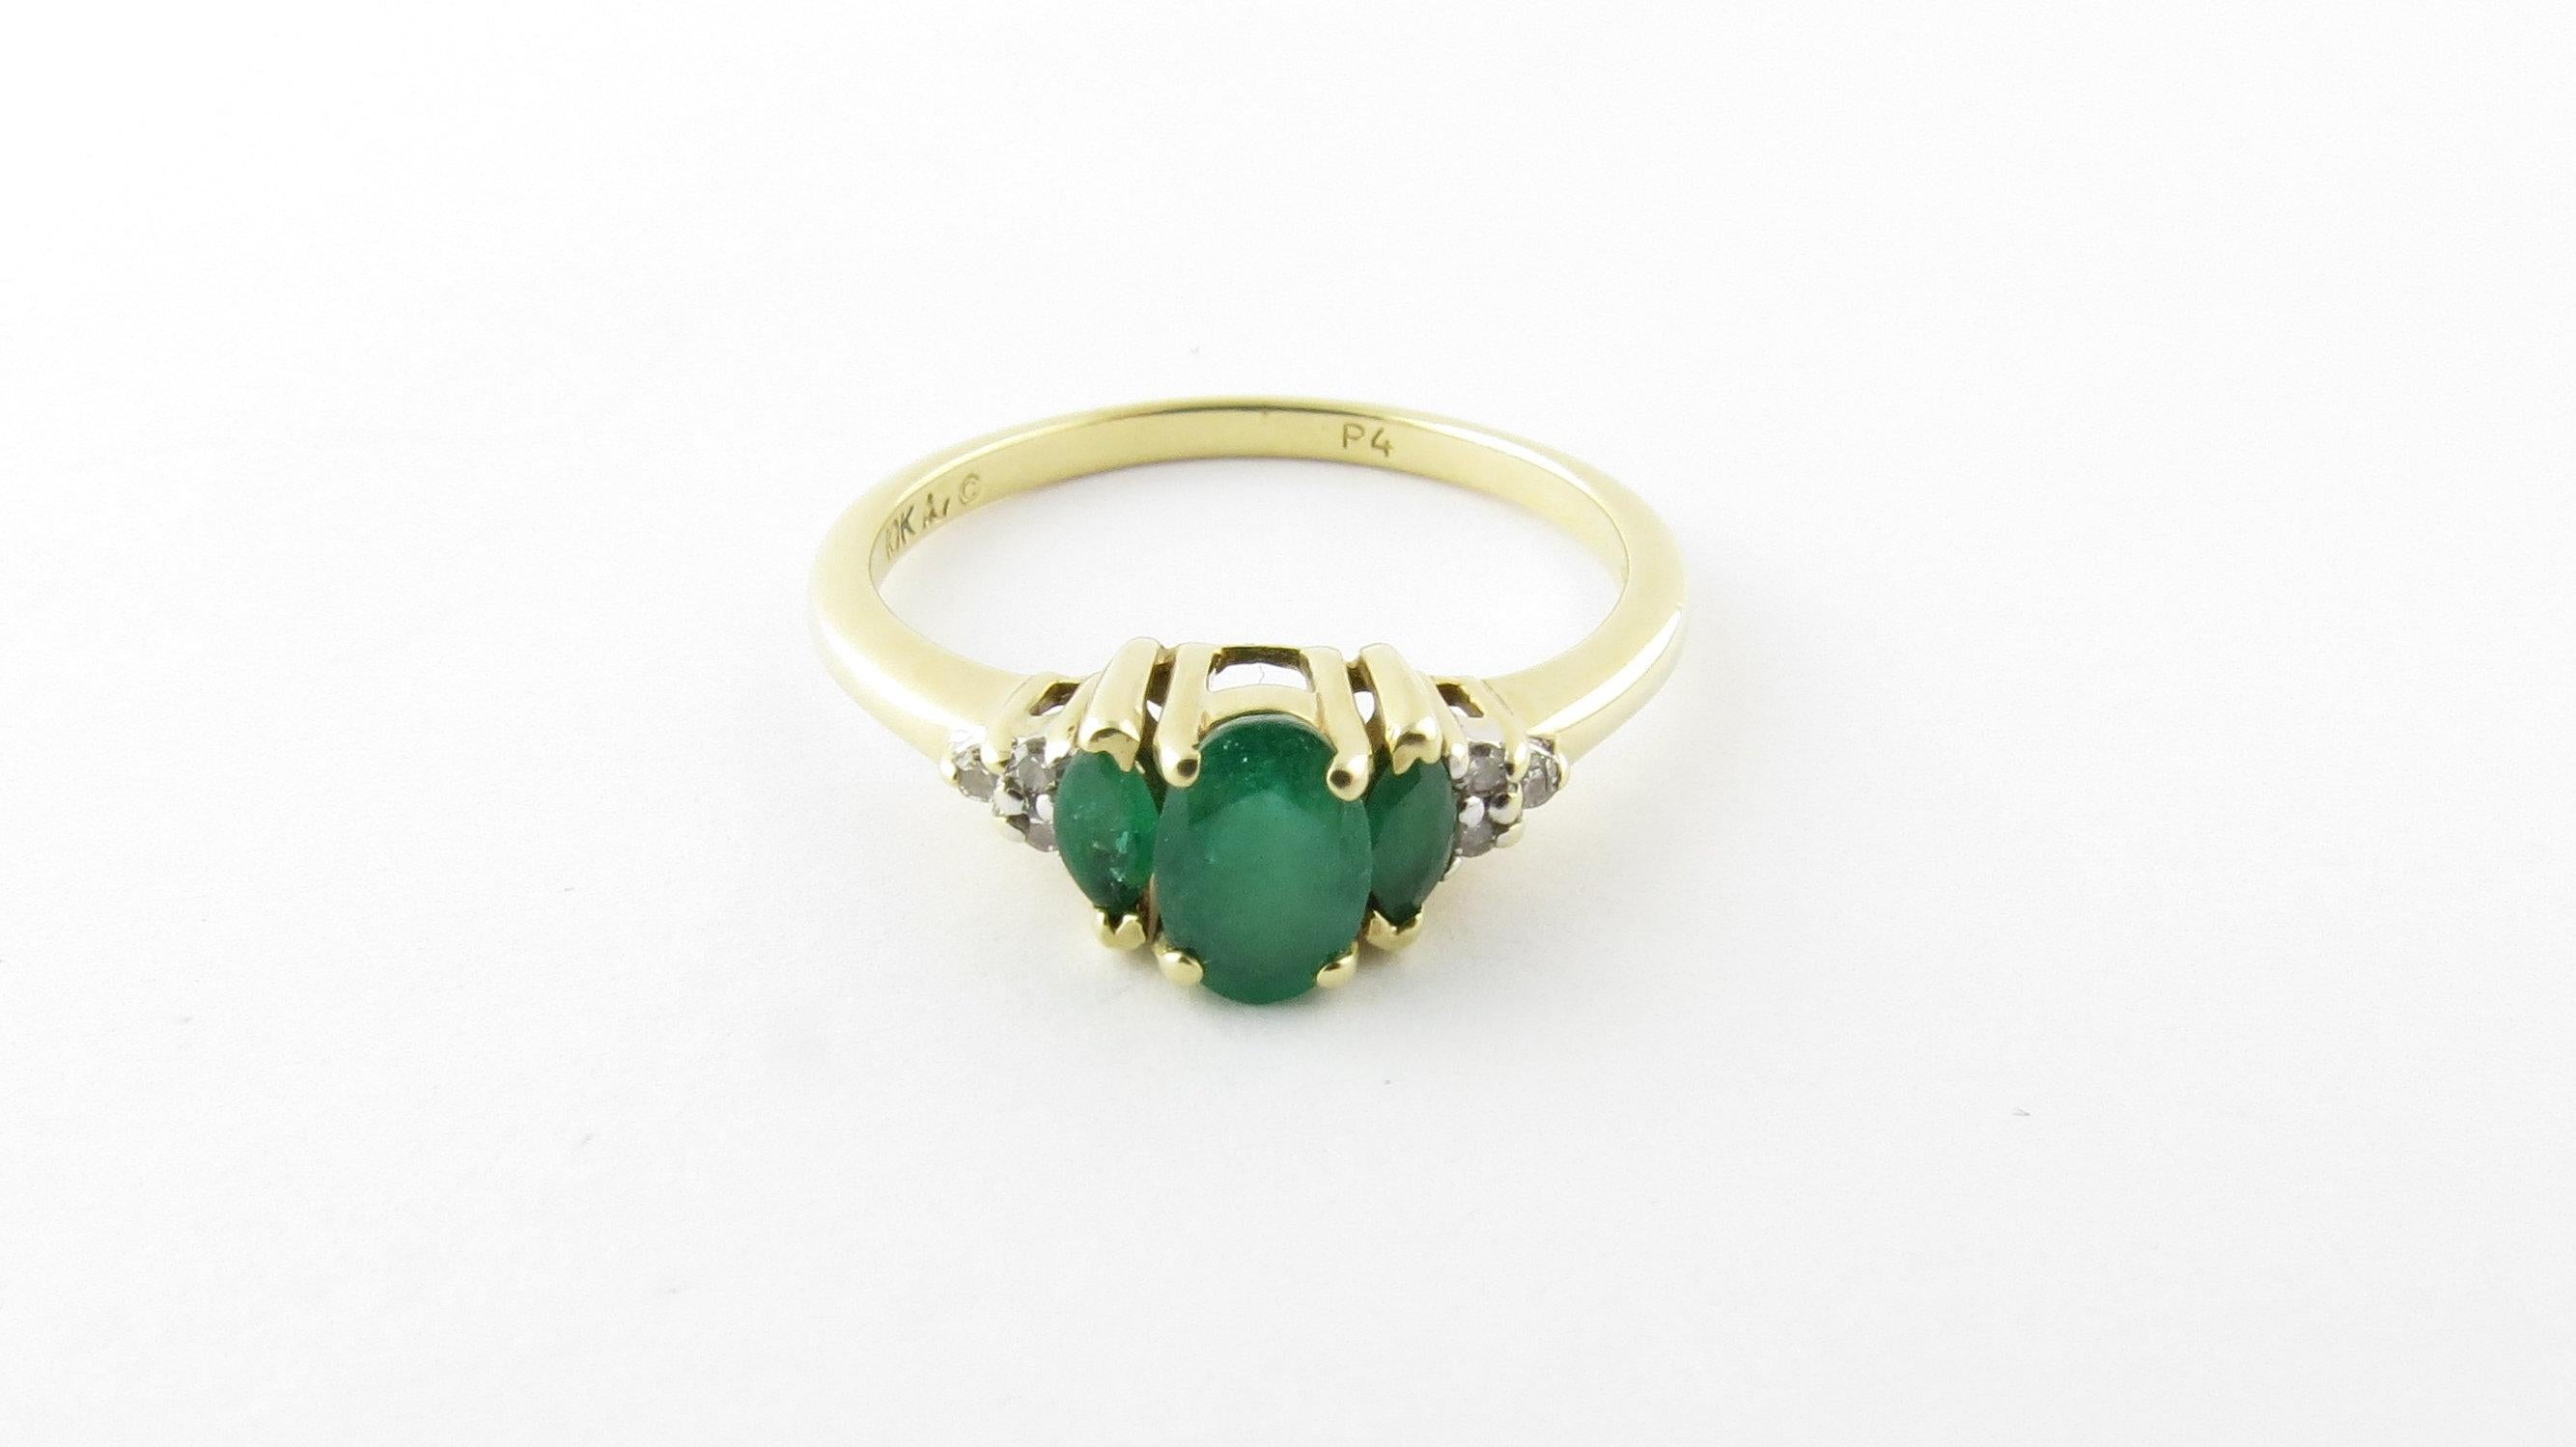 Vintage 10 Karat Yellow Gold Emerald and Diamond Ring Size 6.75- This lovely ring features three genuine emeralds (center: 6 mm x 4 mm, sides: 4 mm x 2 mm) accented with six single cut diamonds set in classic 14K yellow gold. Shank: 2 mm.